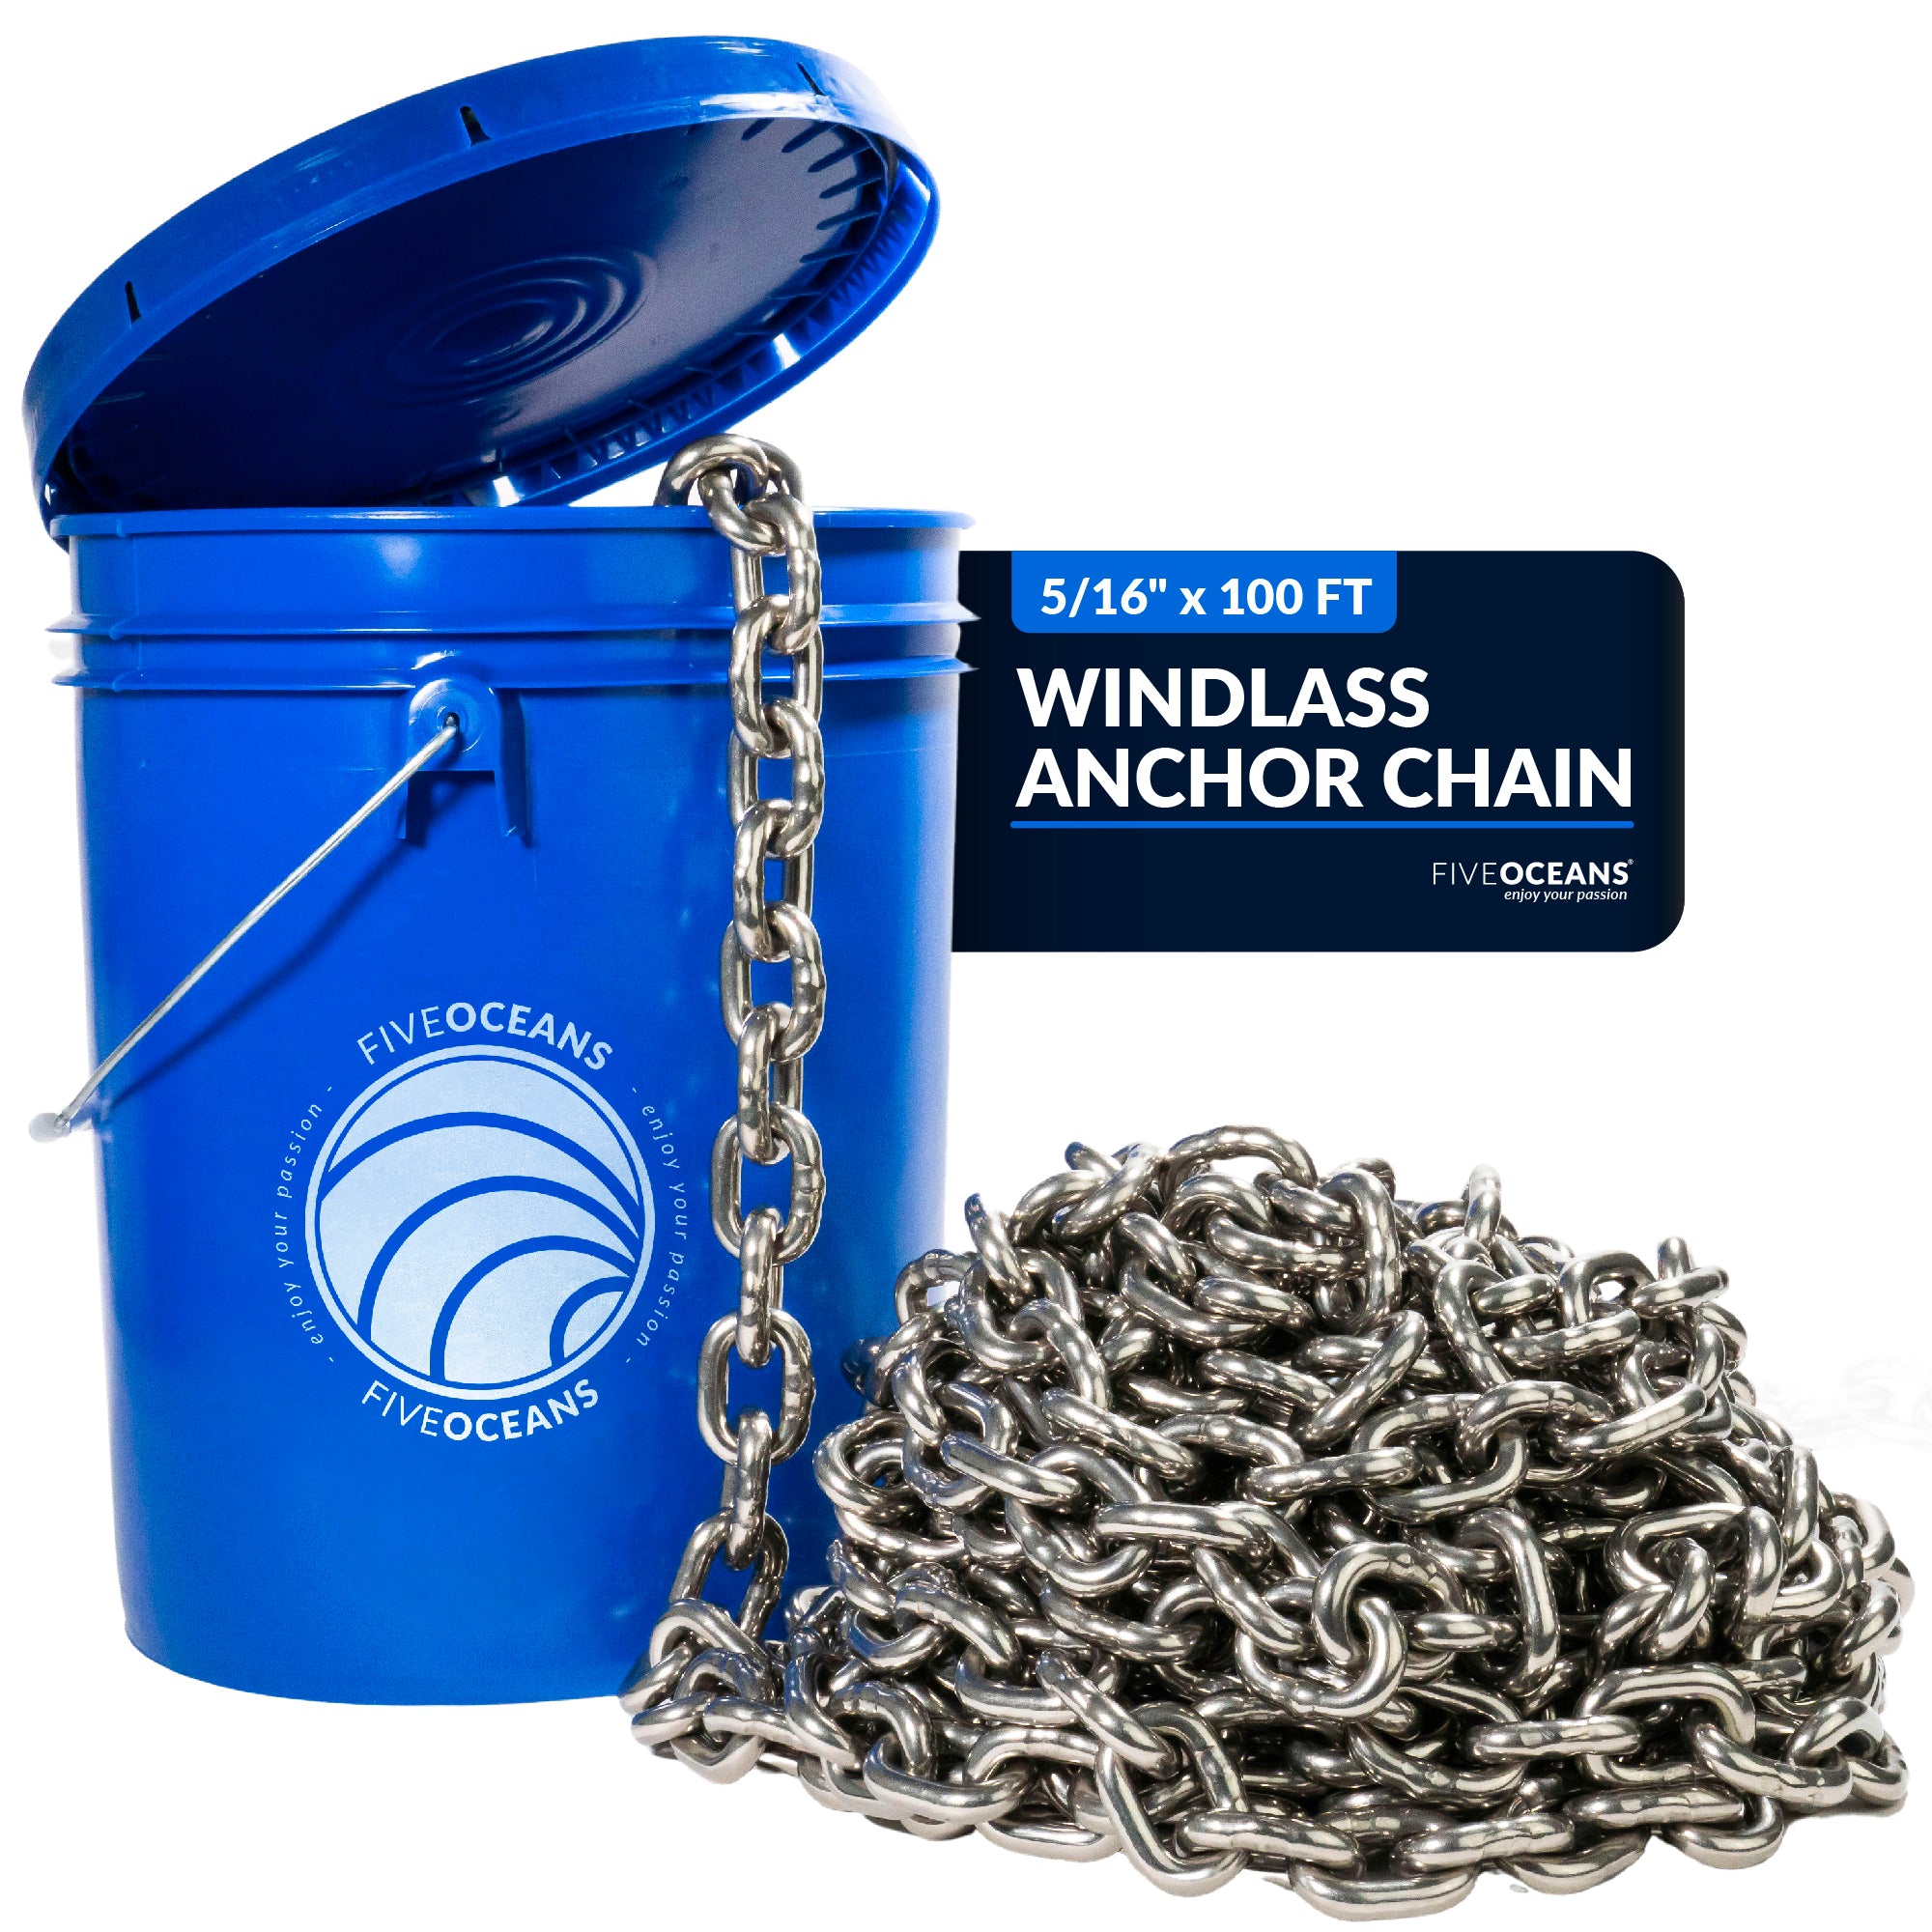 5/16" x 100'  Boat Windlass Anchor Chain HT G4 Stainless Steel - FO4493-M100